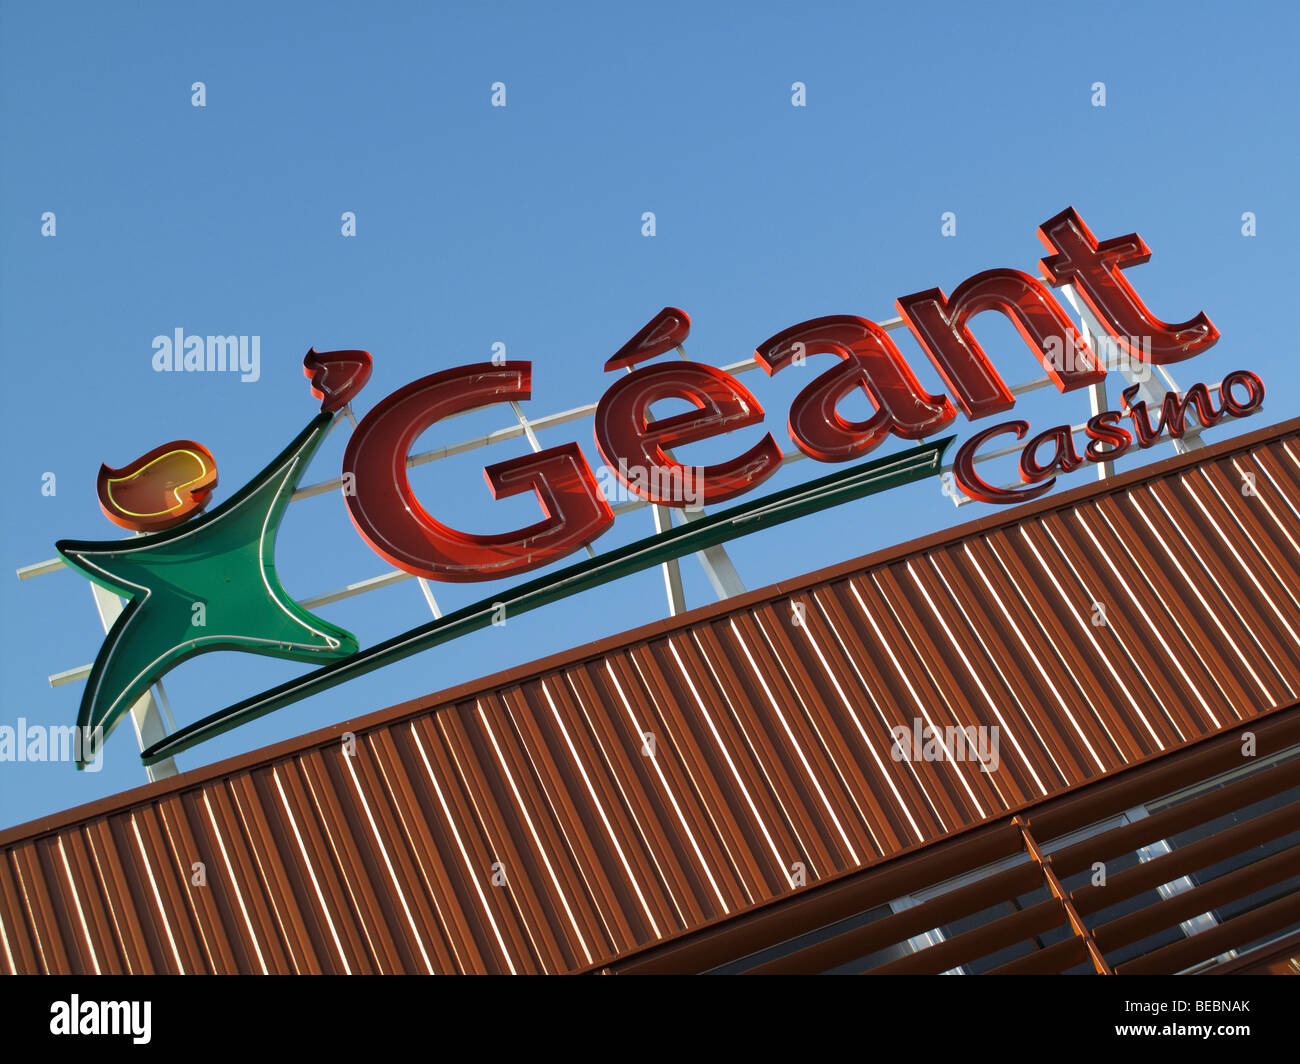 Exterior sign for a Geant Casino supermarket in France Stock Photo